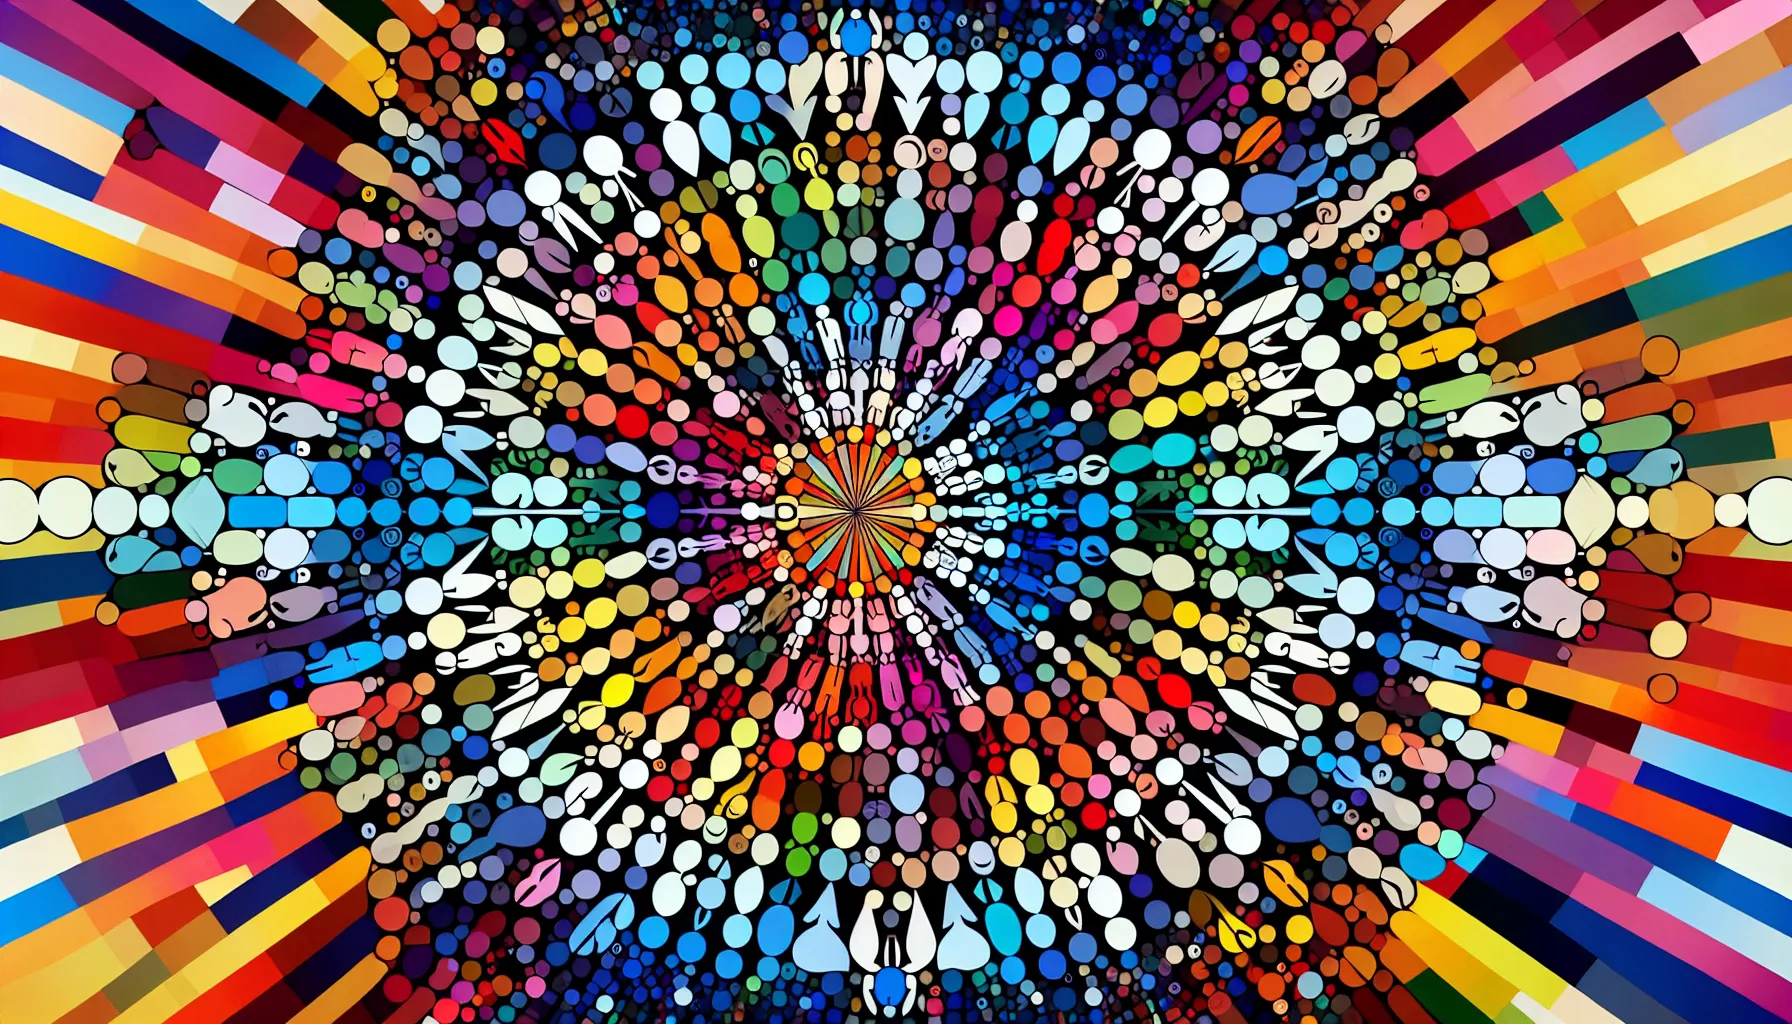 Just as colors blend in a kaleidoscope to create a stunning tableau, so do individuals in polyamorous relationships merge their unique energies to form a balanced and harmonious whole.